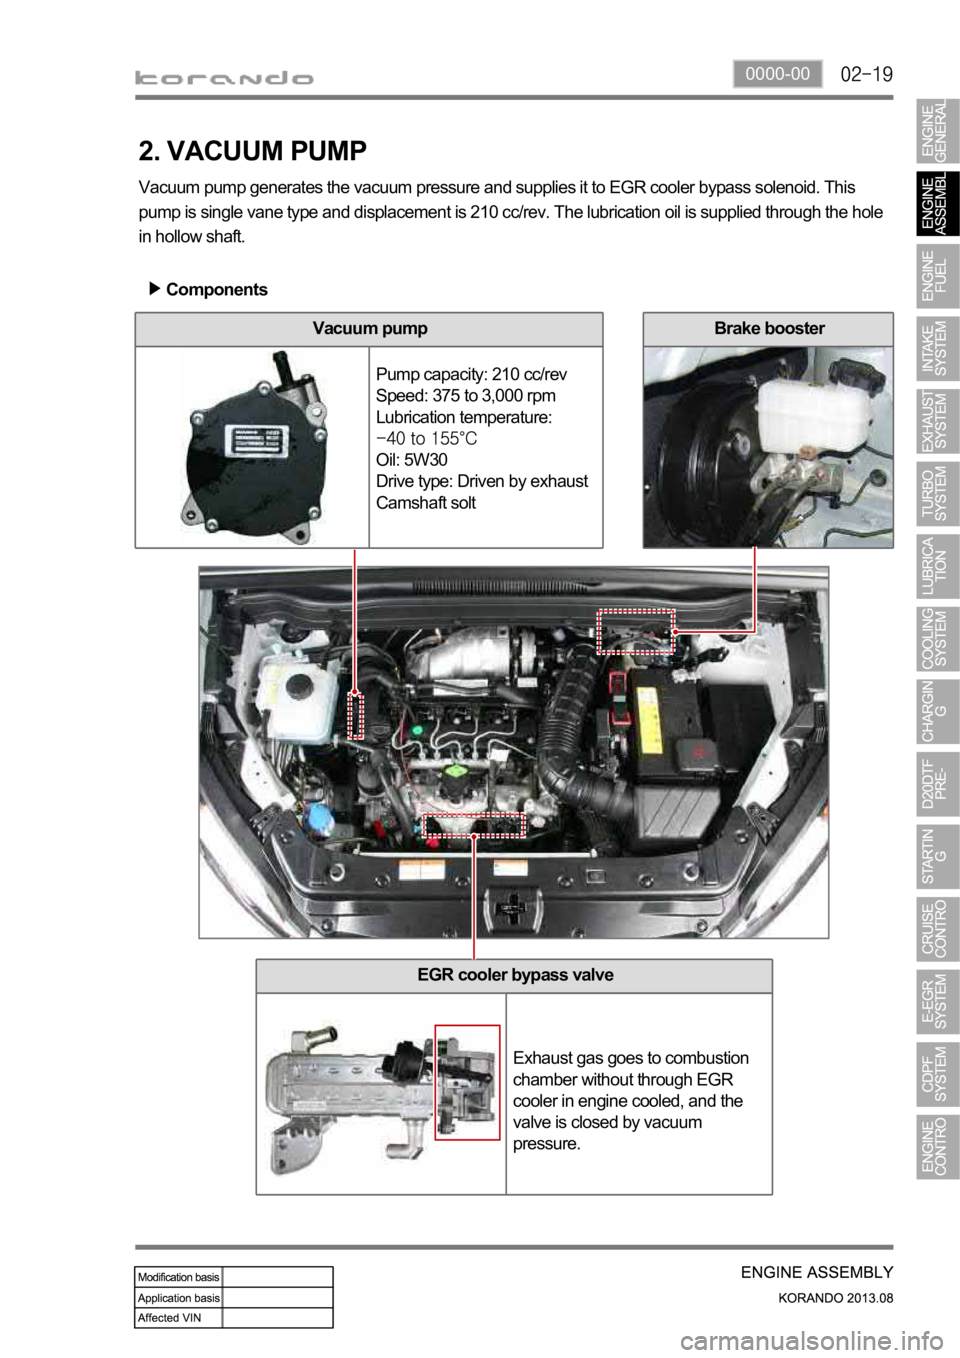 SSANGYONG KORANDO 2013  Service Manual 0000-00
EGR cooler bypass valve
Exhaust gas goes to combustion 
chamber without through EGR 
cooler in engine cooled, and the 
valve is closed by vacuum 
pressure.
2. VACUUM PUMP
Vacuum pump generates